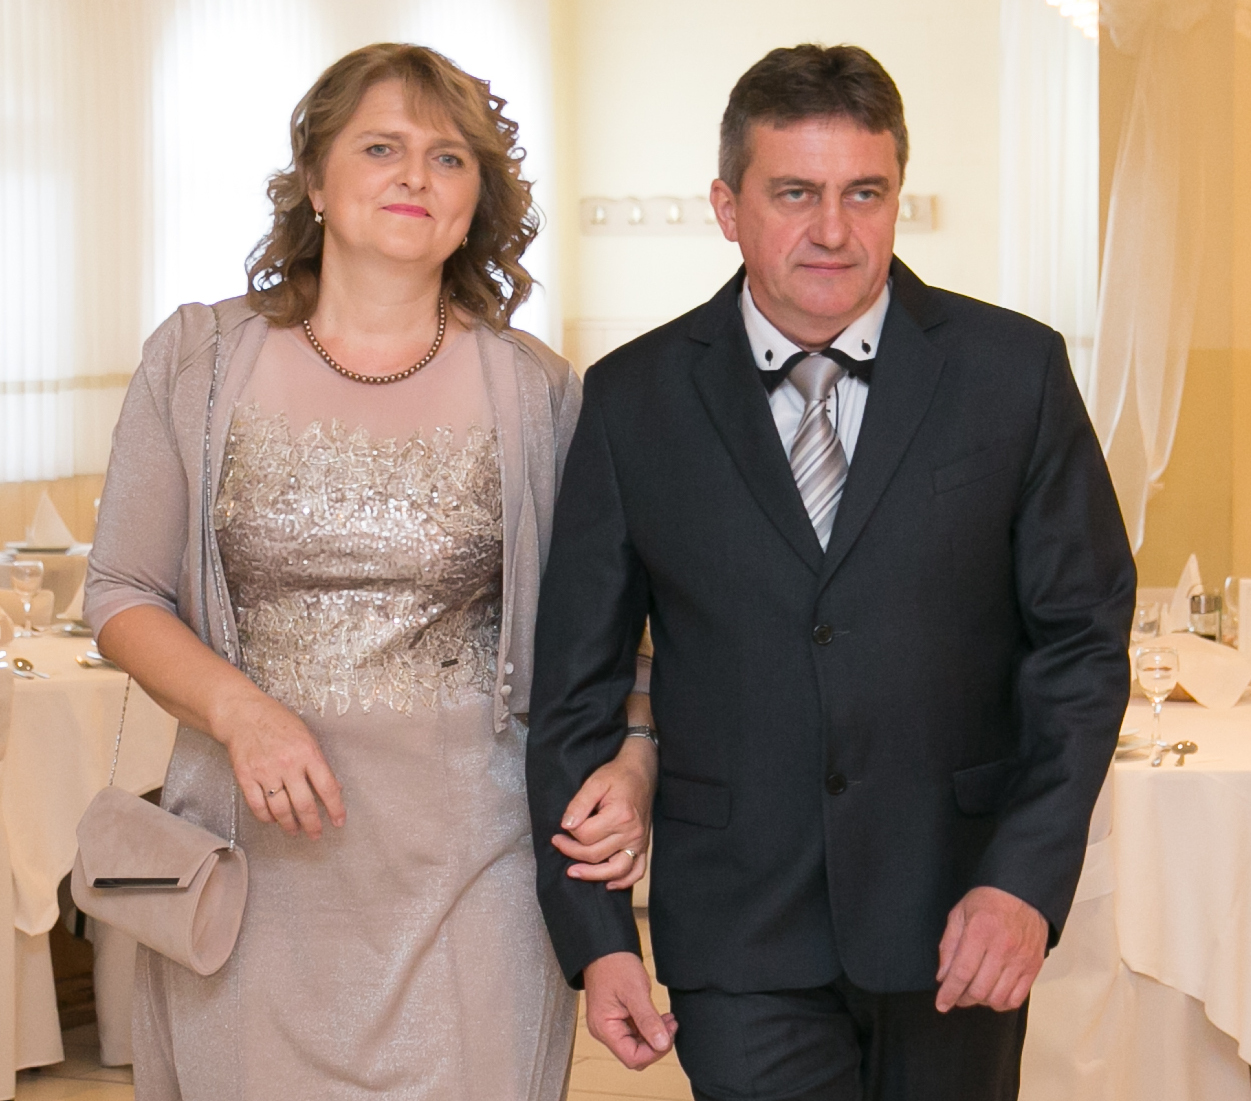 The owners Josip and Milena.